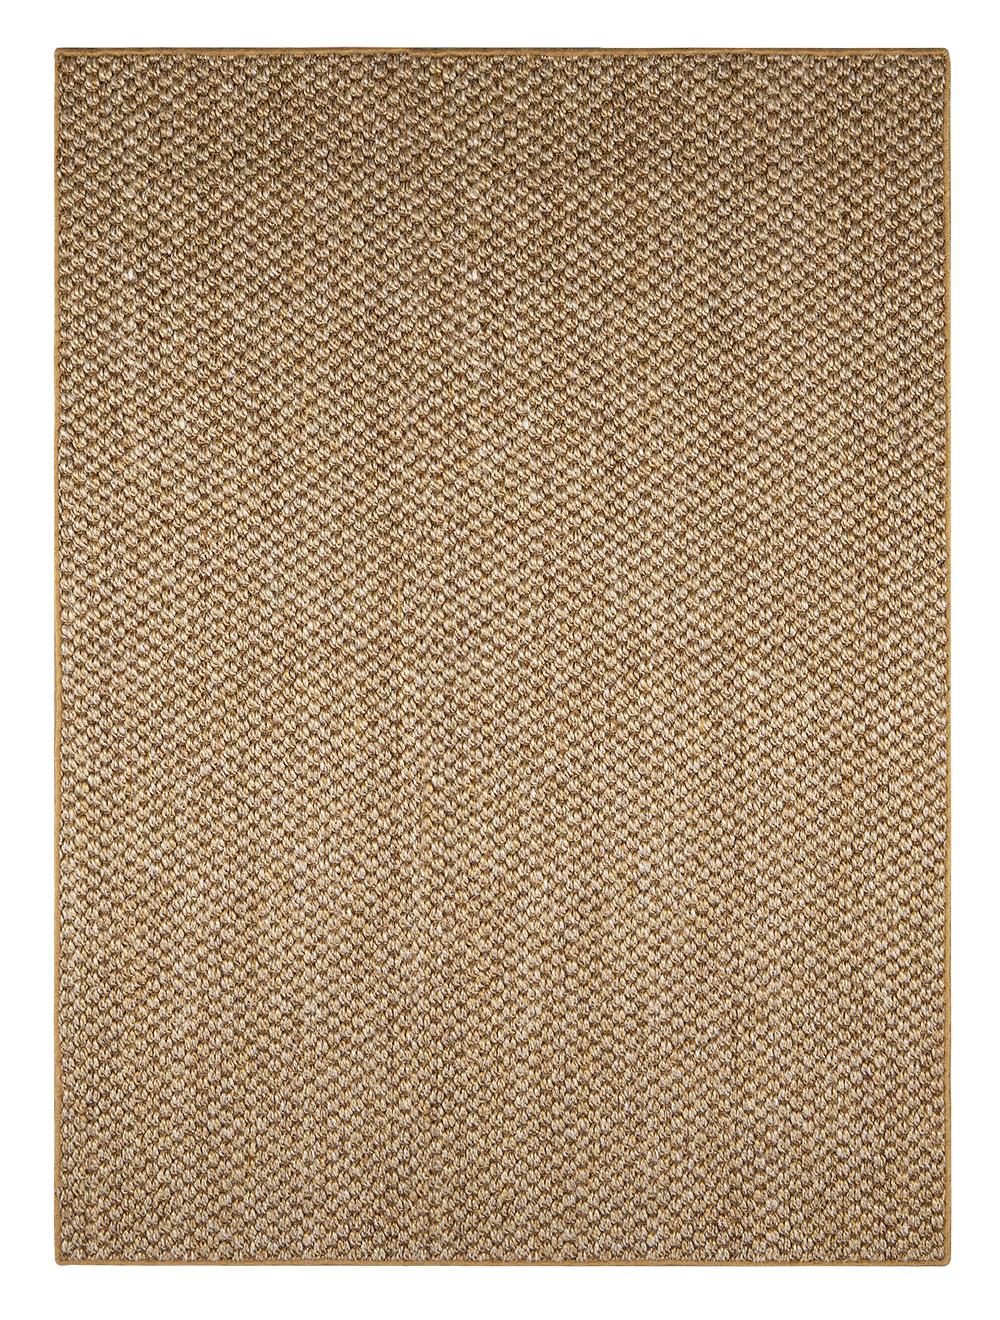 Natural belize carpet by Massimo Copenhagen.
Materials: 100% Sisal.
Dimensions: W 240 x H 320 cm.
Available colors: Taupe and Natural.
Other dimensions are available: 90x200 cm, 160x240 cm, 240x320 cm, and special sizes.

Belize is made in a